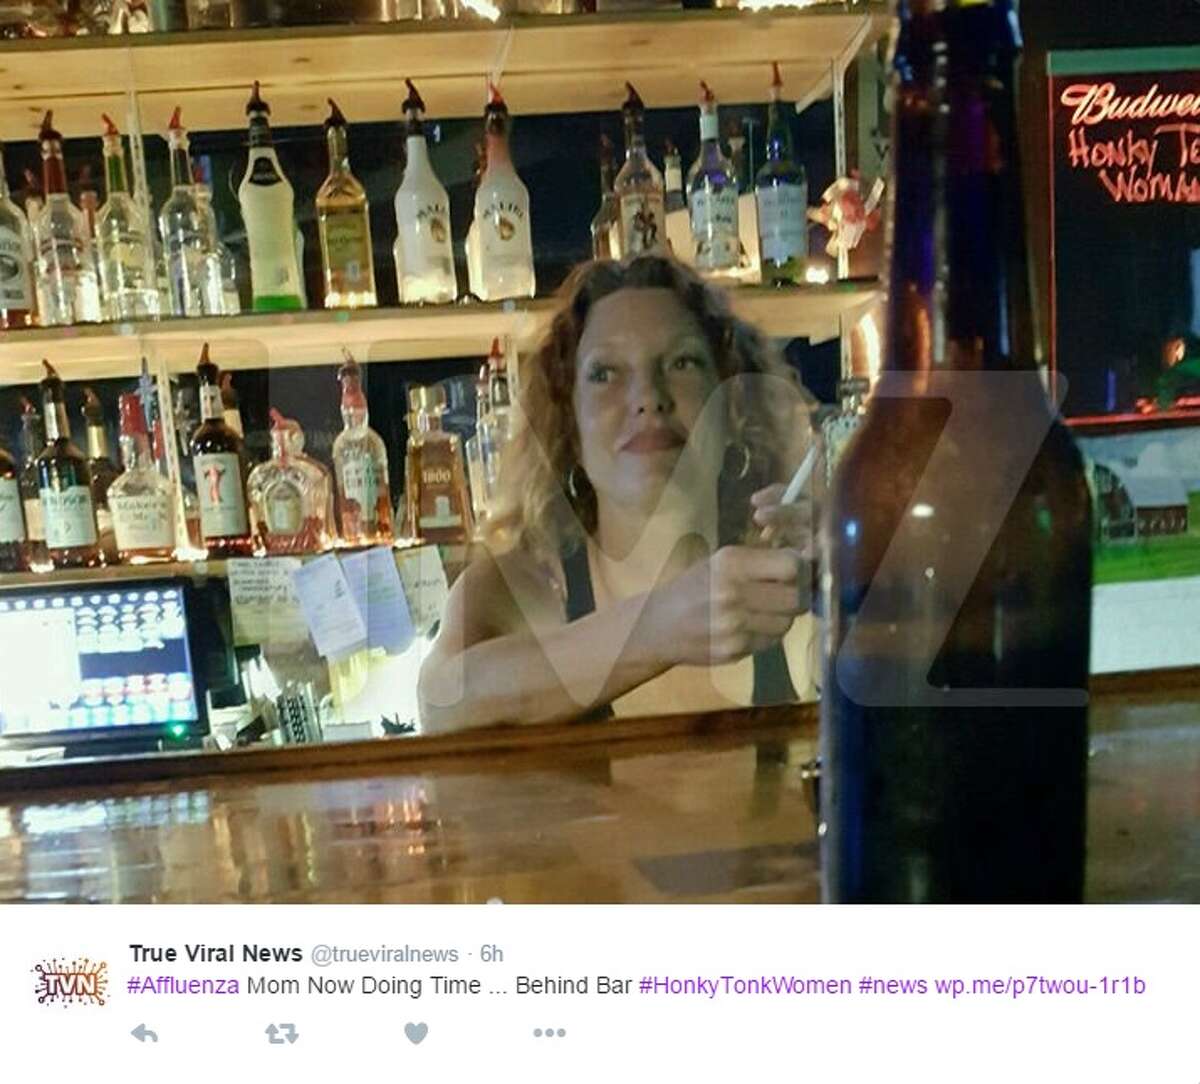 Tonya Couch, mother of the "affluenza teen" Ethan Couch," is now working at a bar in Azle, Texas.